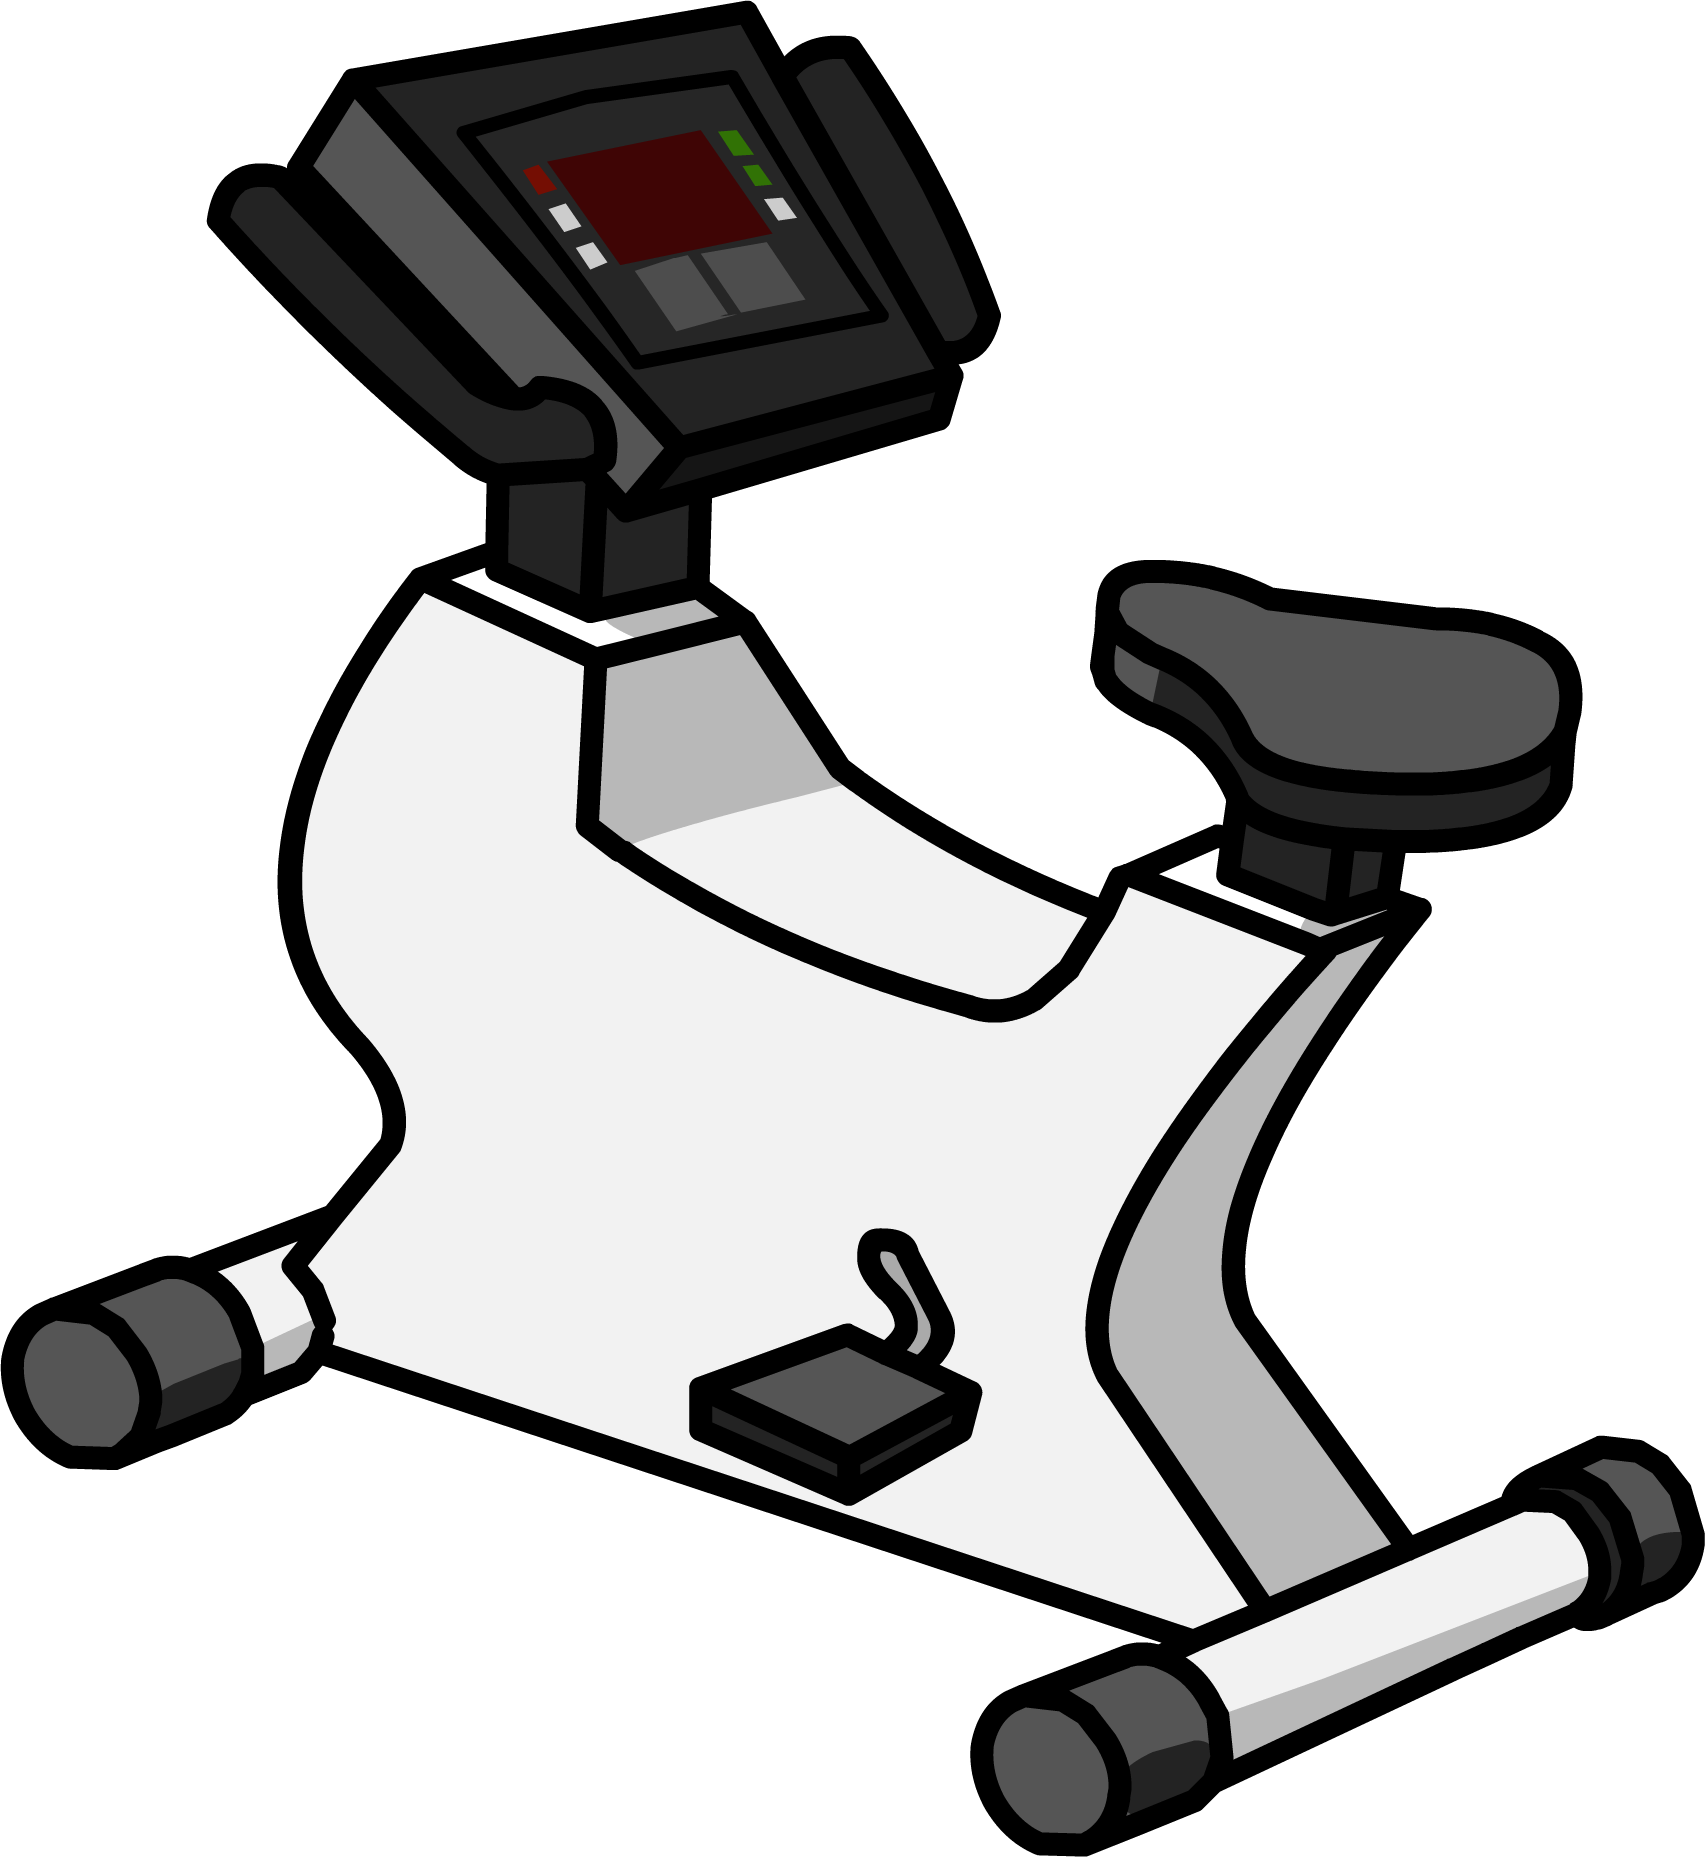 Image exercise bike png. Exercising clipart treadmill